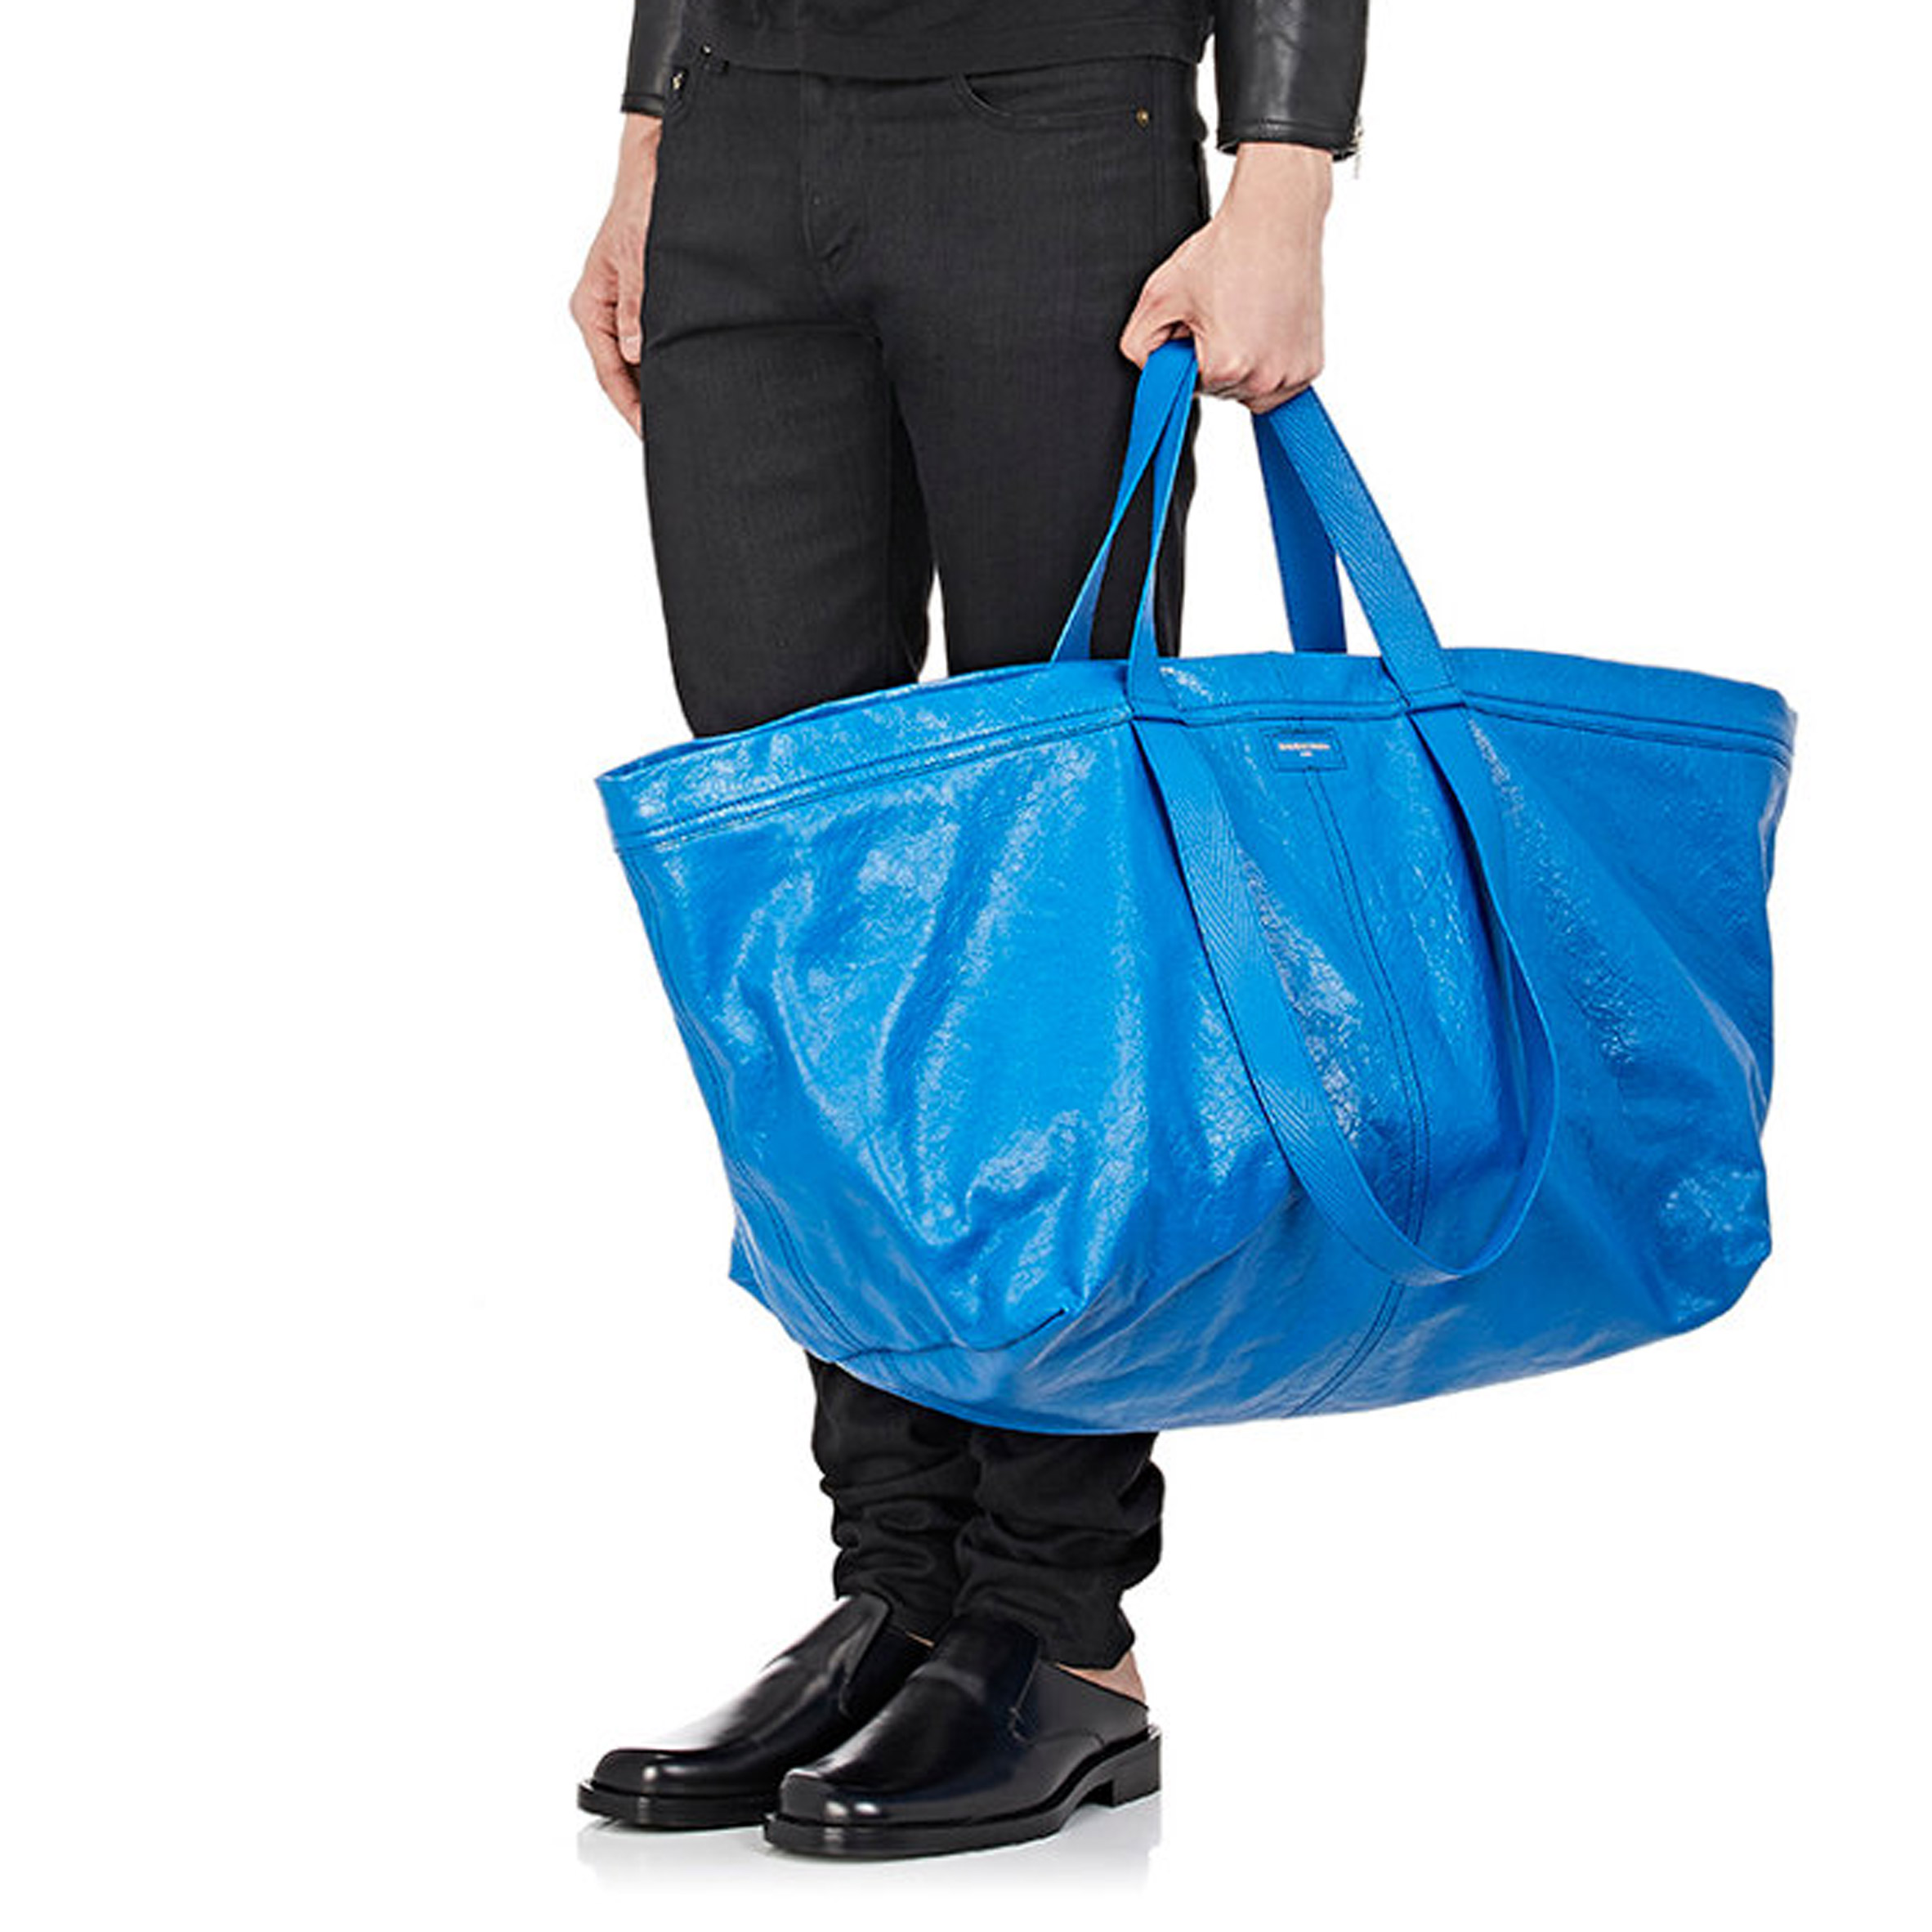 IKEA Redesigns Its Big Blue Bag For The First Time Ever